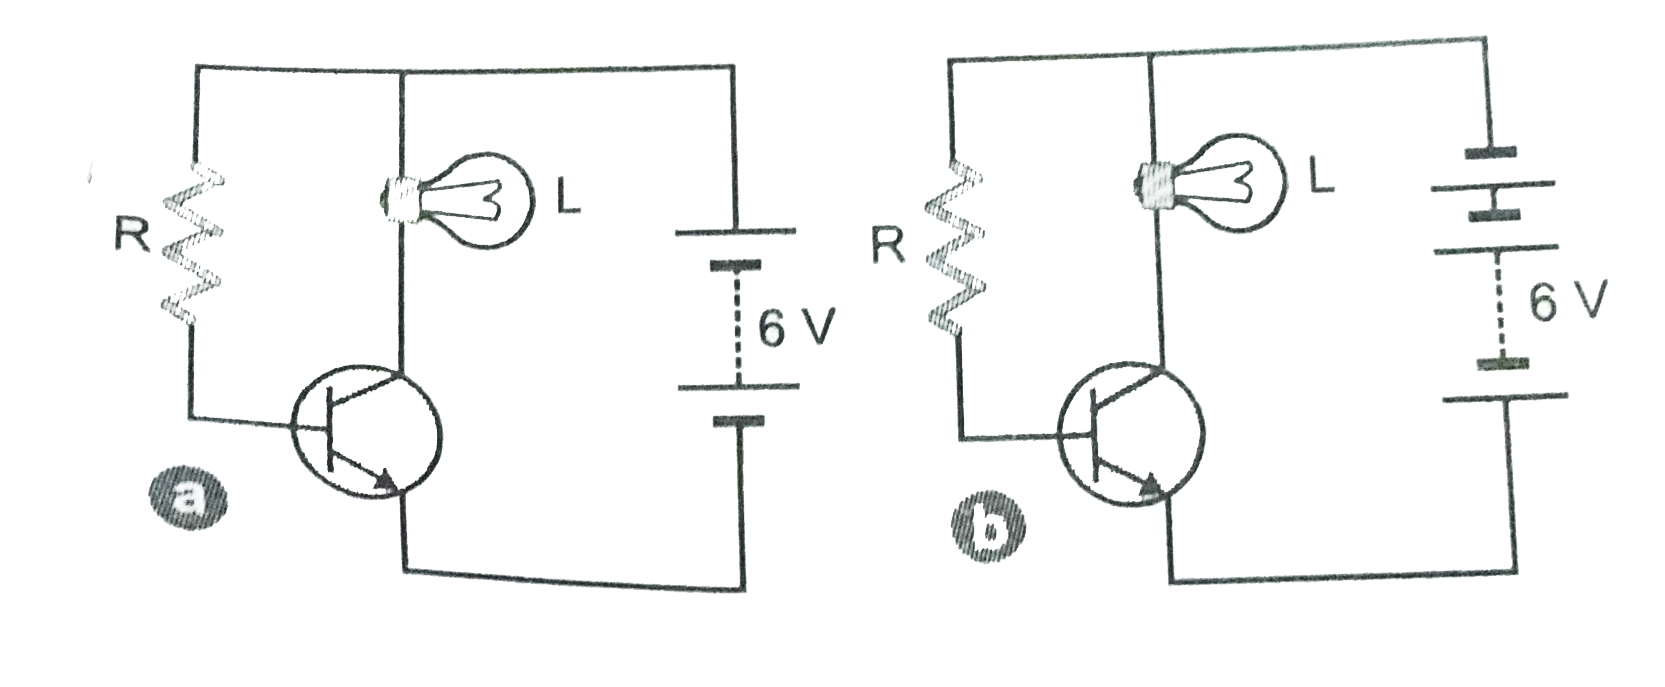 In only one of the circuits given below, the lamp L light. Which circuit is it ? Give reason for your answer.